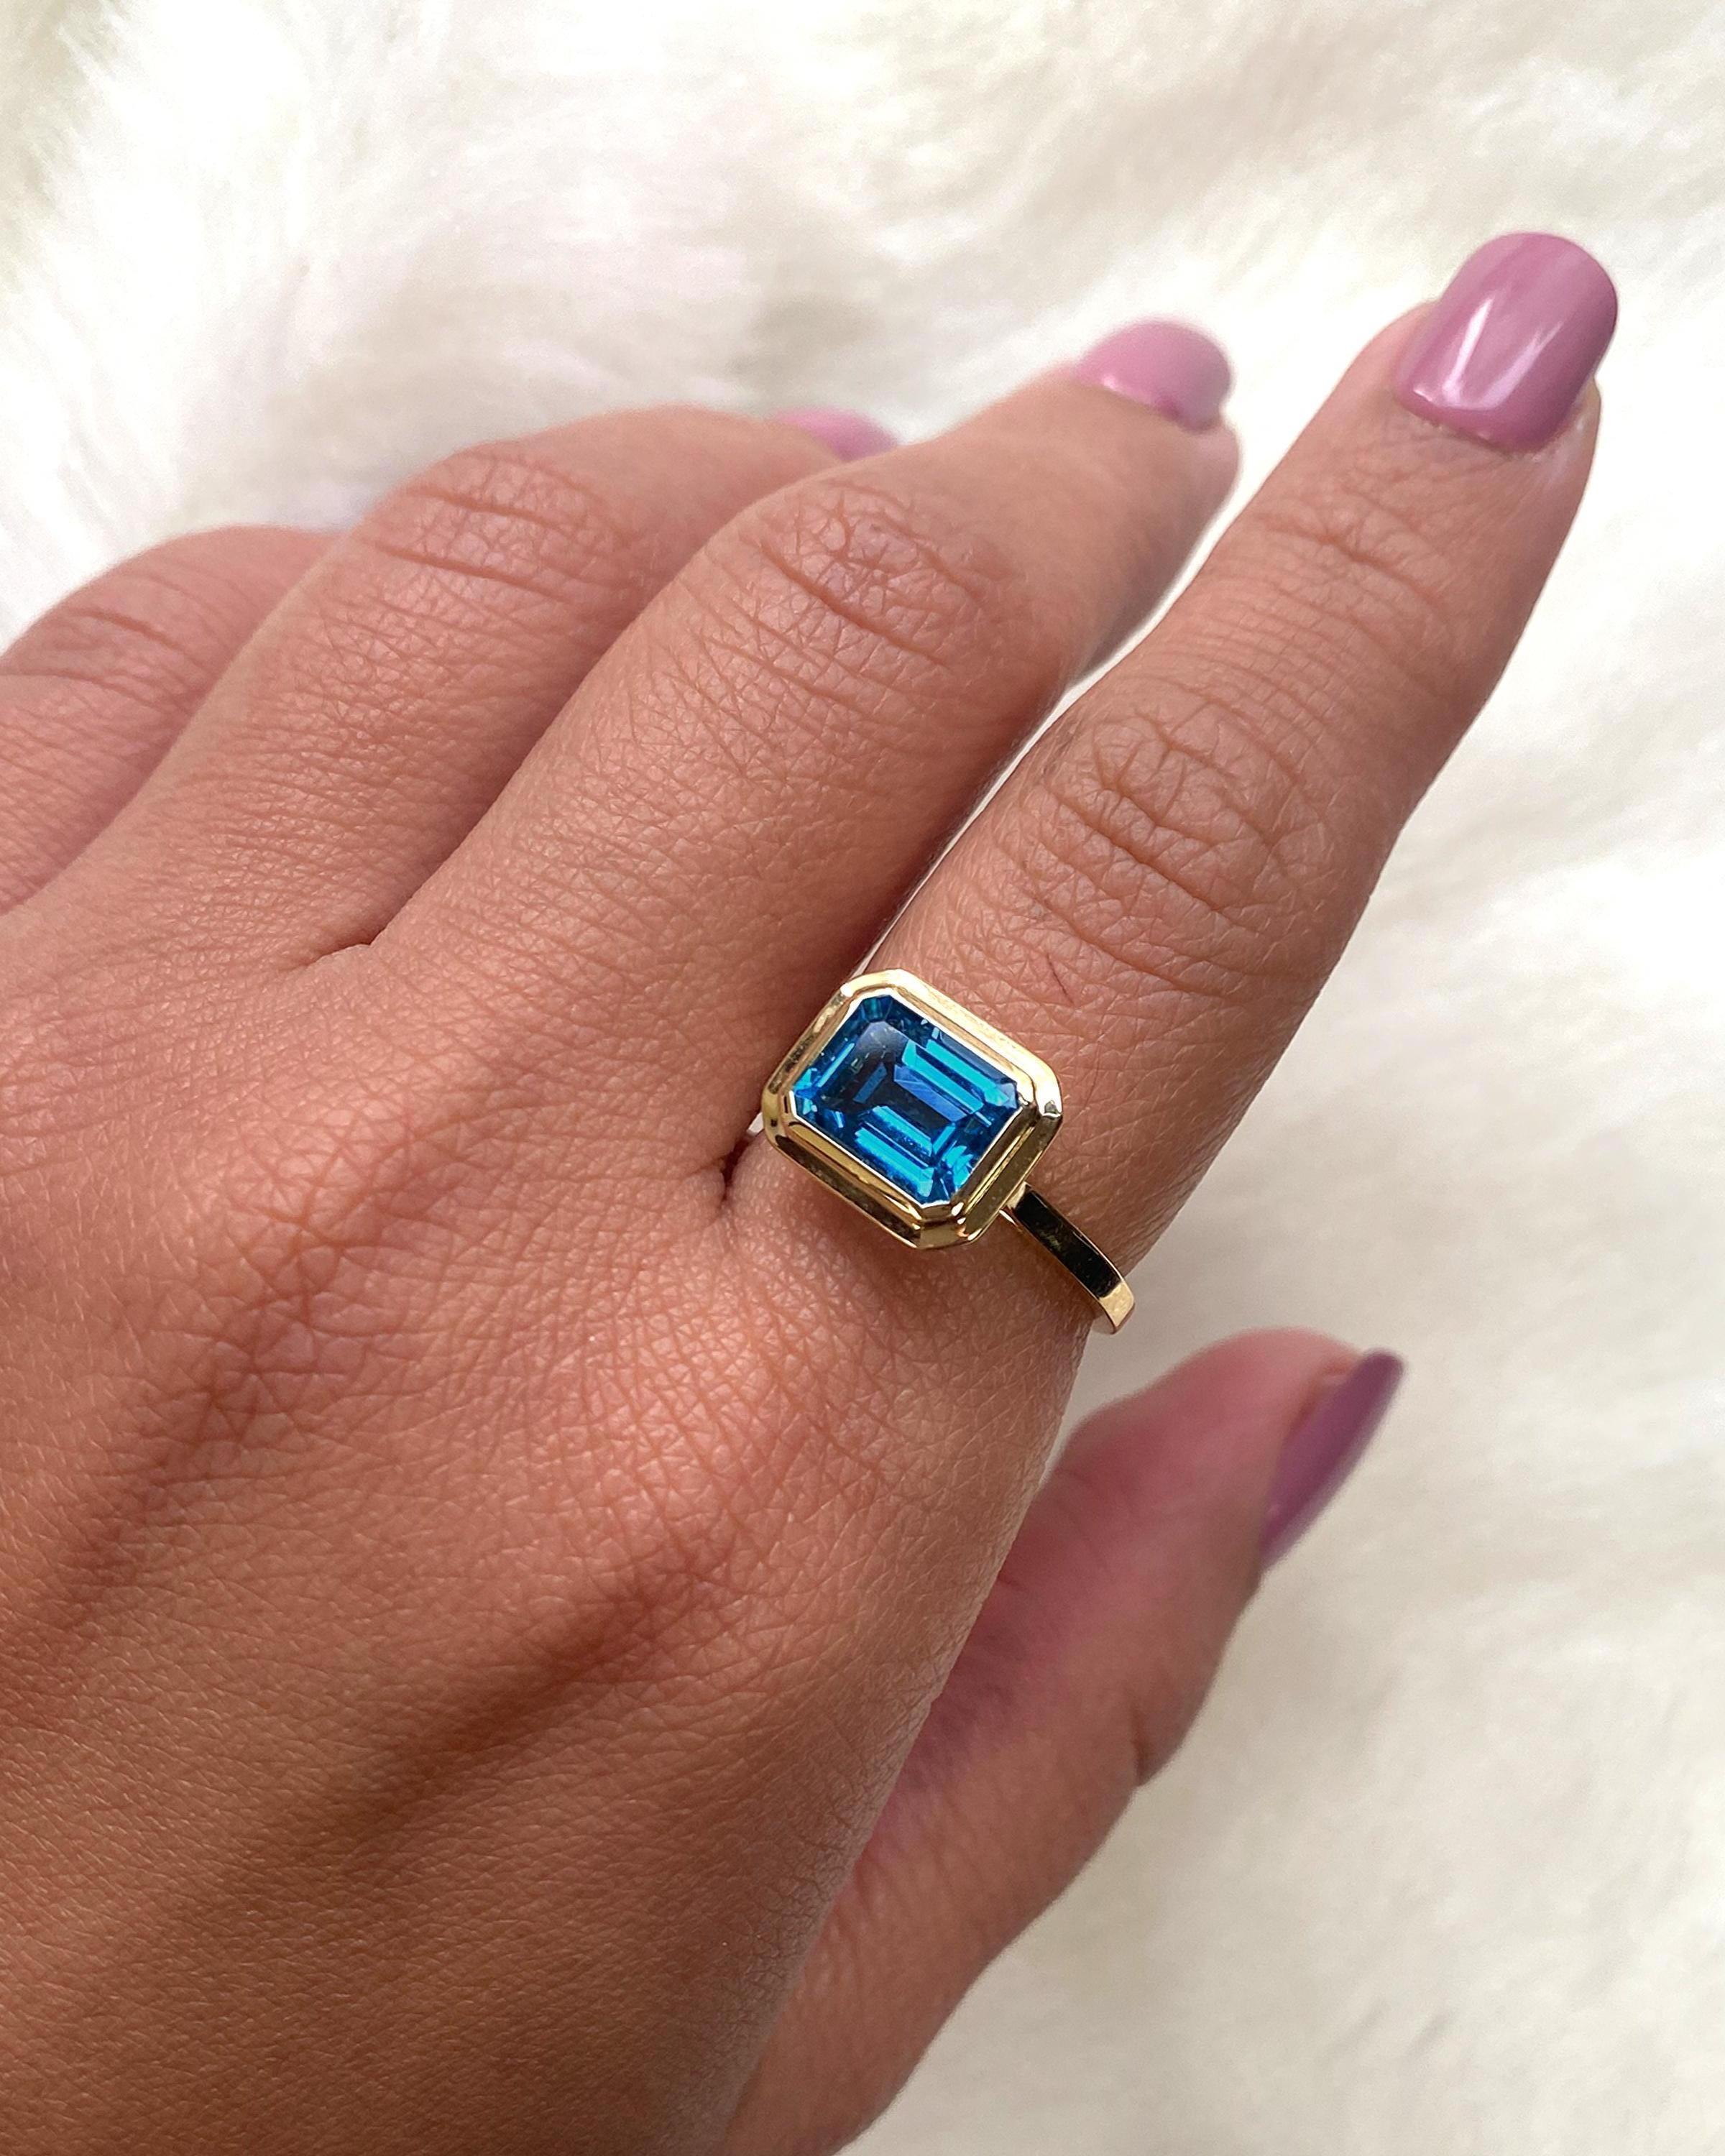 This London Blue Topaz Emerald Cut Bezel Set Ring in 18K Yellow Gold is a sleek piece from the 'Manhattan' Collection. It features a stunning emerald-cut London Blue Topaz stone set in a 18K yellow gold bezel. This ring embodies modern elegance,